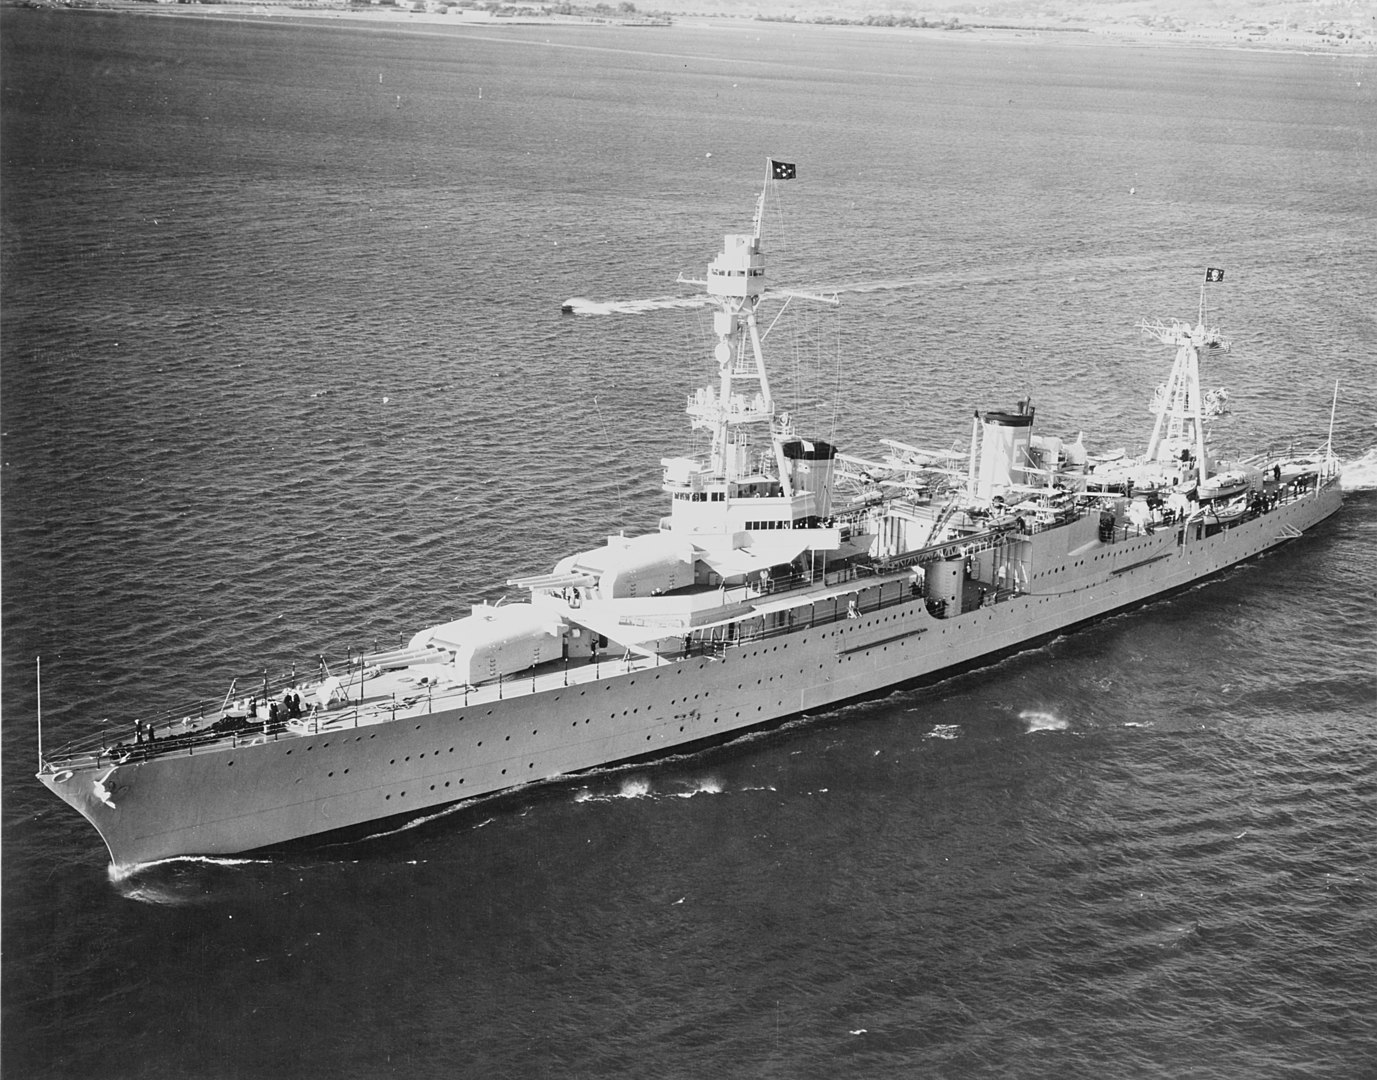 The USS Houston sails in San Diego in 1935